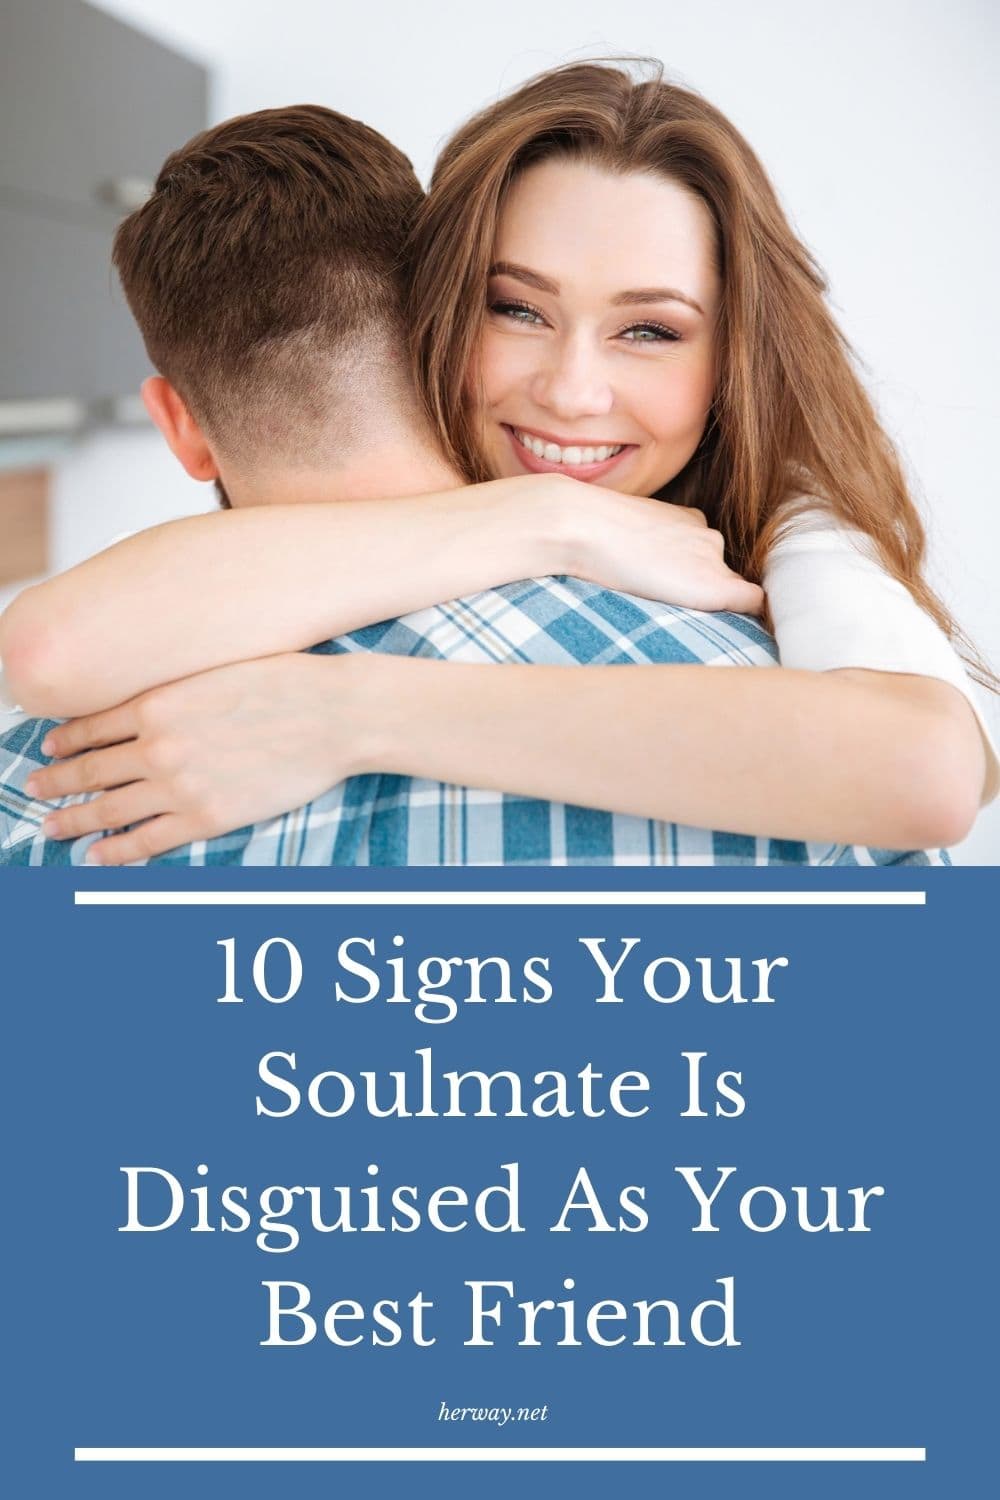 10 Signs Your Soulmate Is Disguised As Your Best Friend